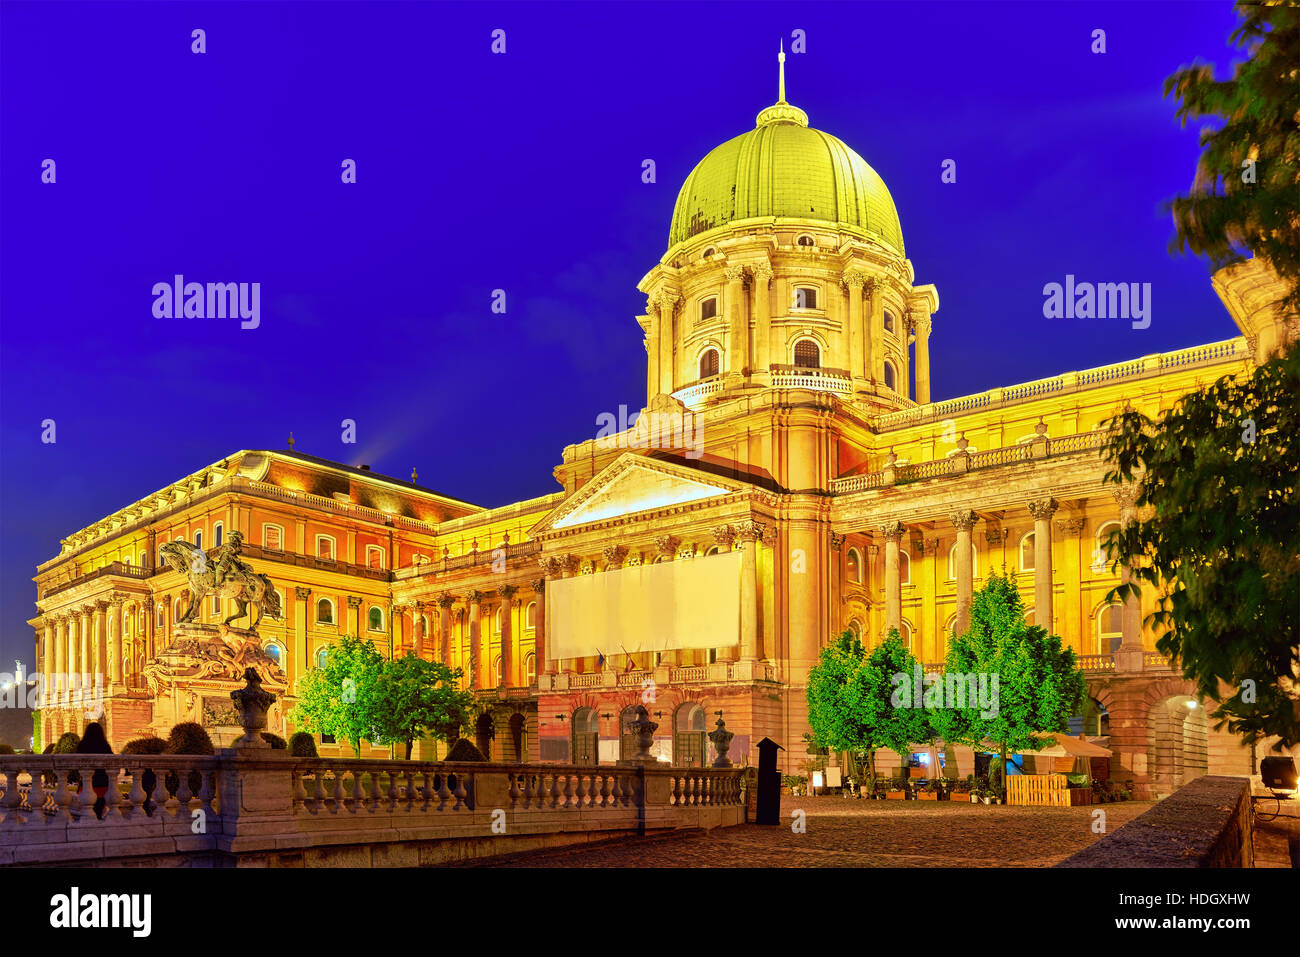 Budapest Royal Castle at night time. Hungary. Stock Photo